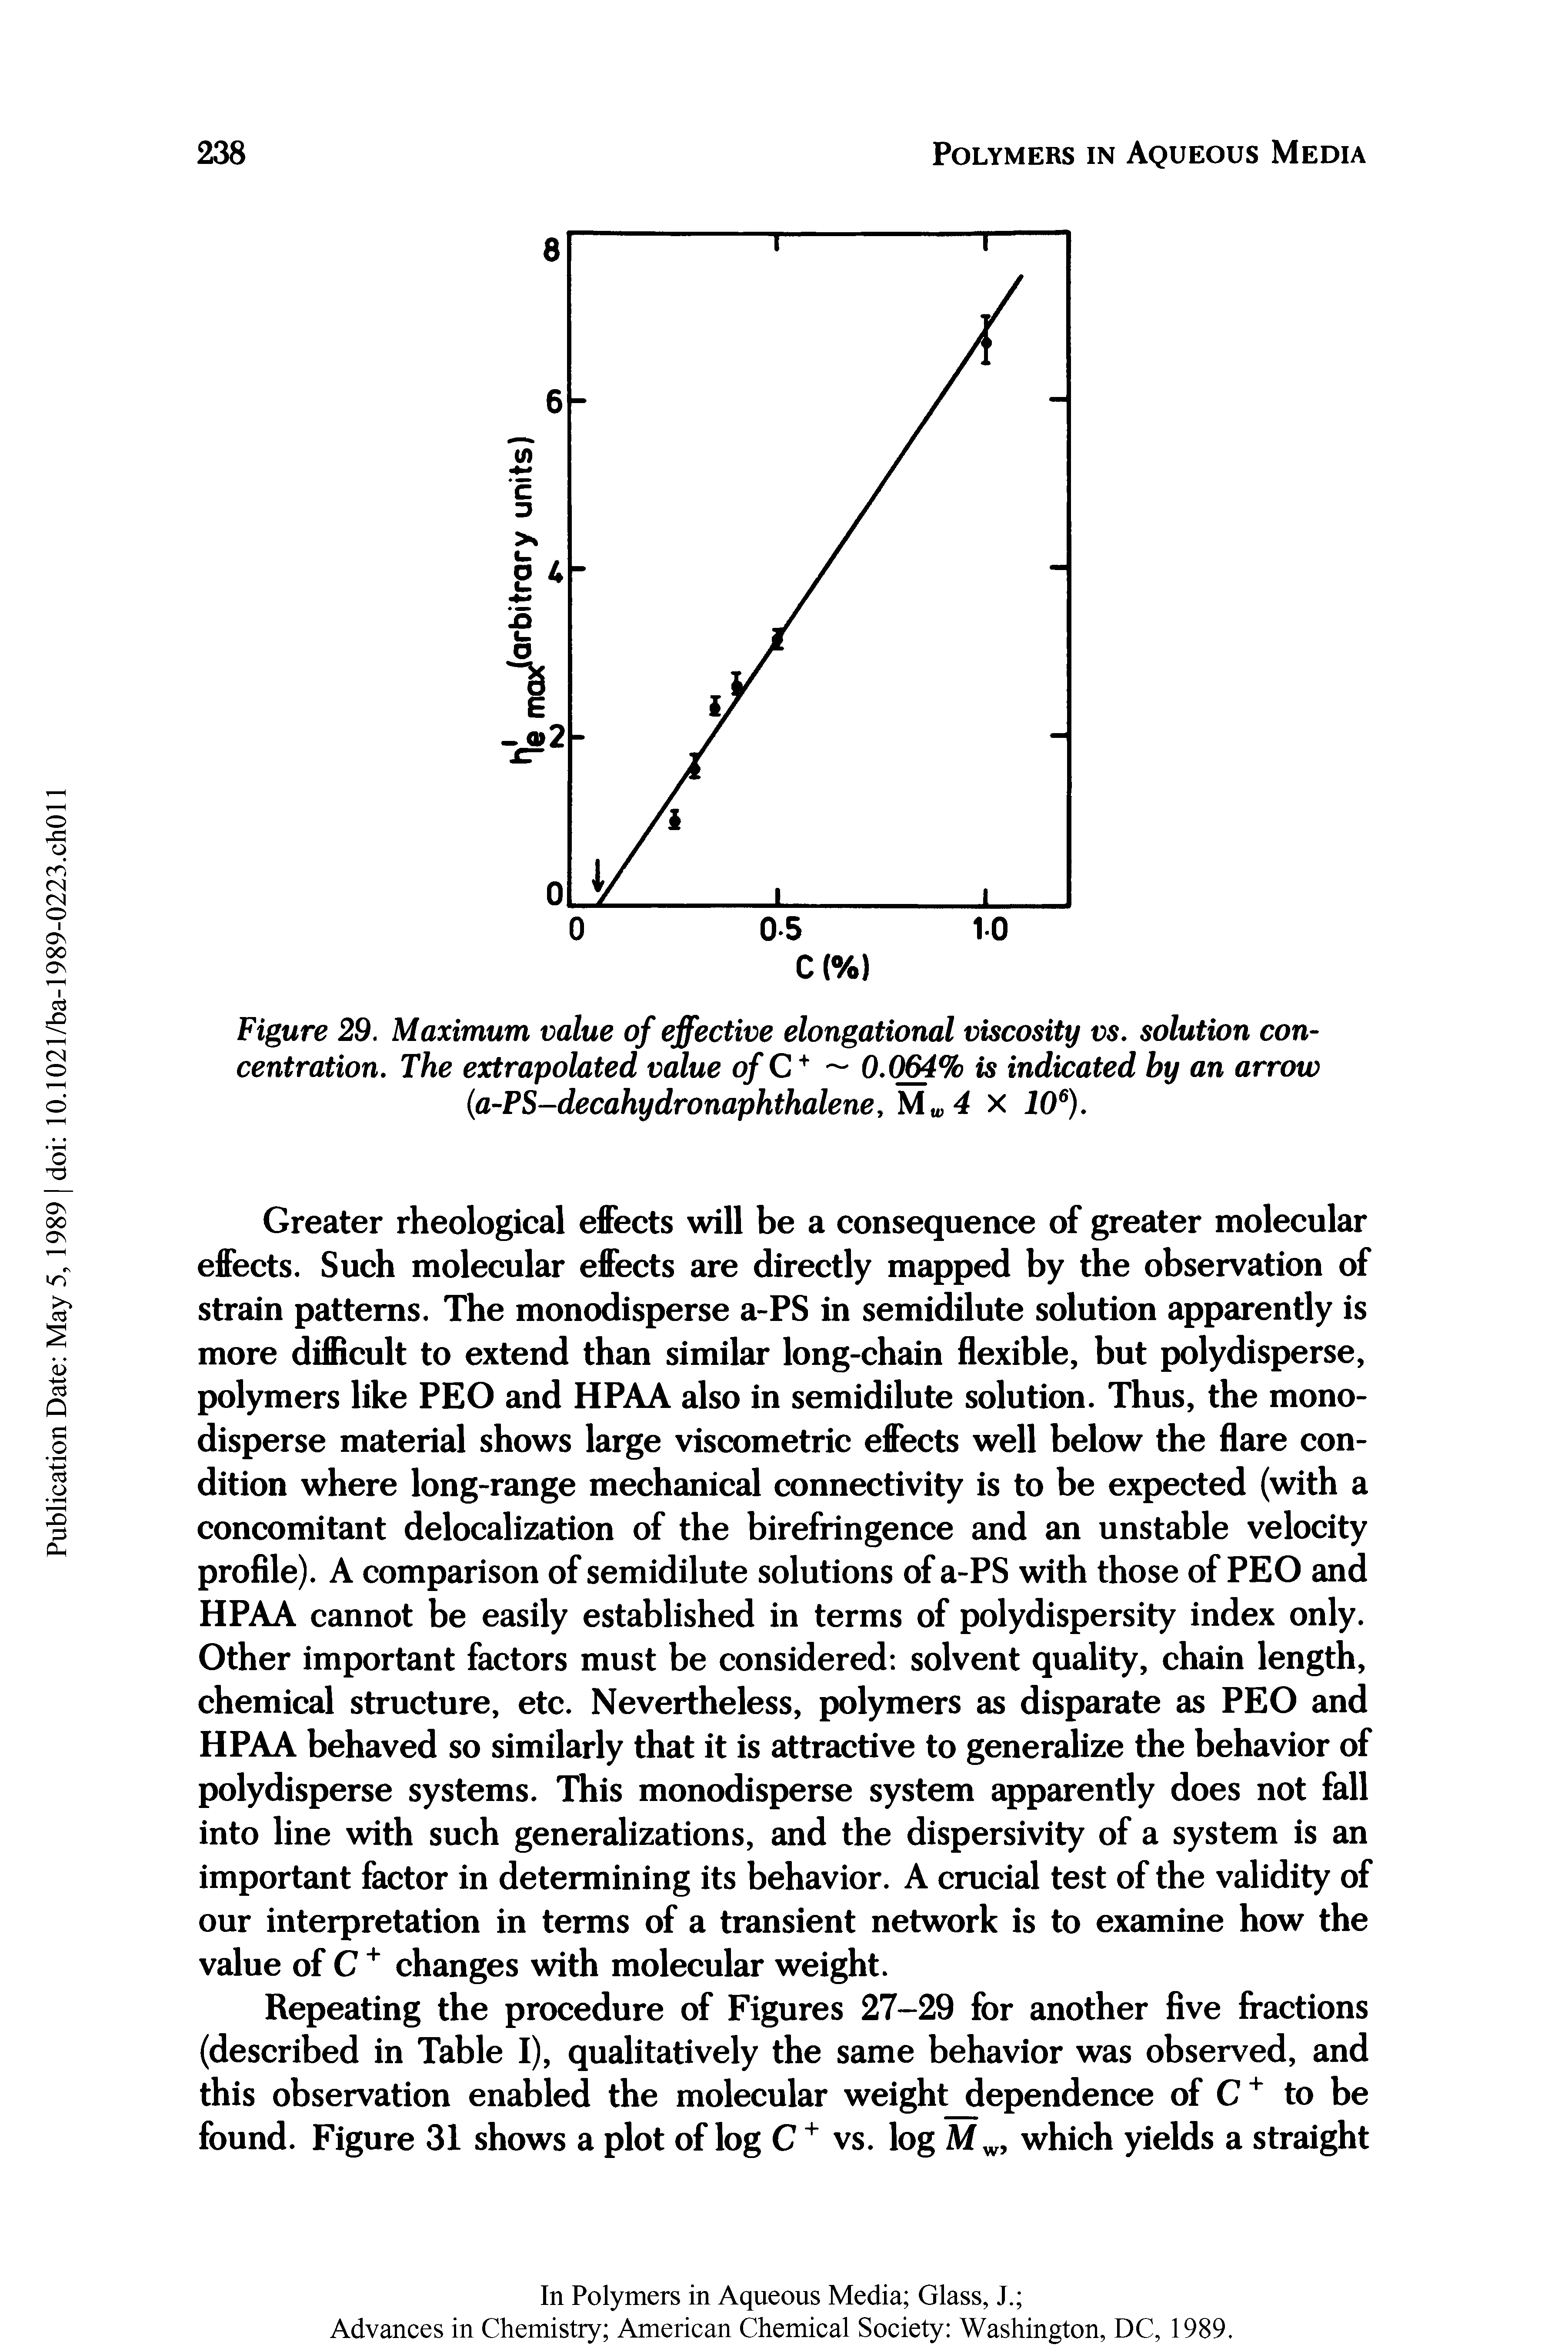 Figure 29. Maximum value of effective elongational viscosity vs. solution con-centration. The extrapolated value o/C 0.064% is indicated by an arrow a-PS-decahydronaphthalene, Mw4 x JO ).